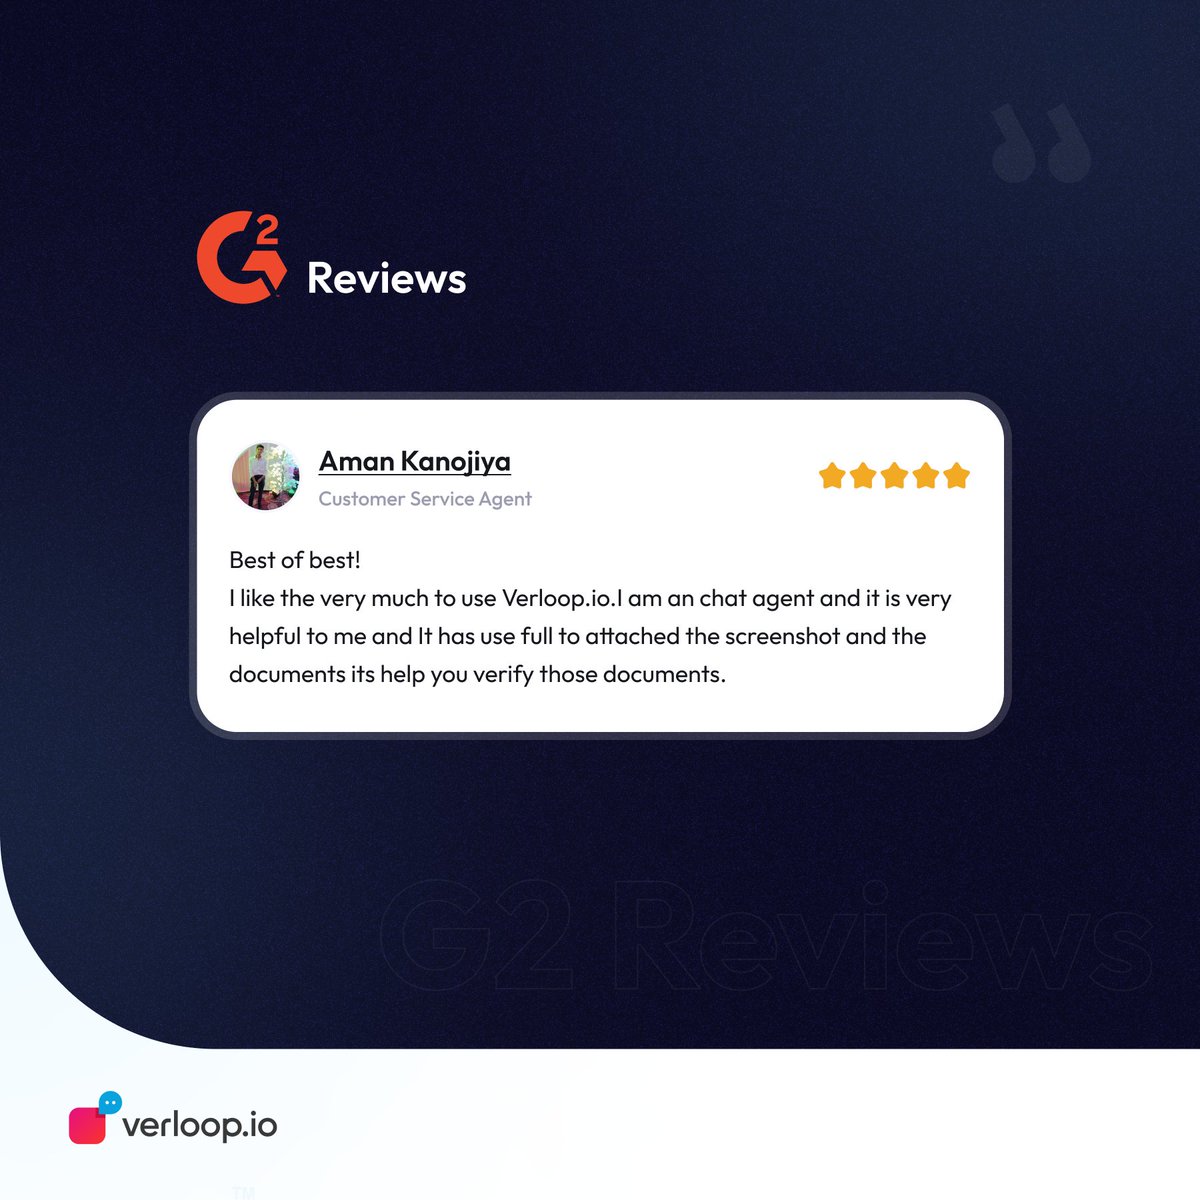 🎉 We're thrilled by the love from our customers on G2! 🎉

💬 Discover why they're obsessed with our support automation solutions! Ready to join the Verloop.io community? Let's connect: shorturl.at/epqN0! 🚀

#CustomerLove #G2Testimonials #SupportAutomation